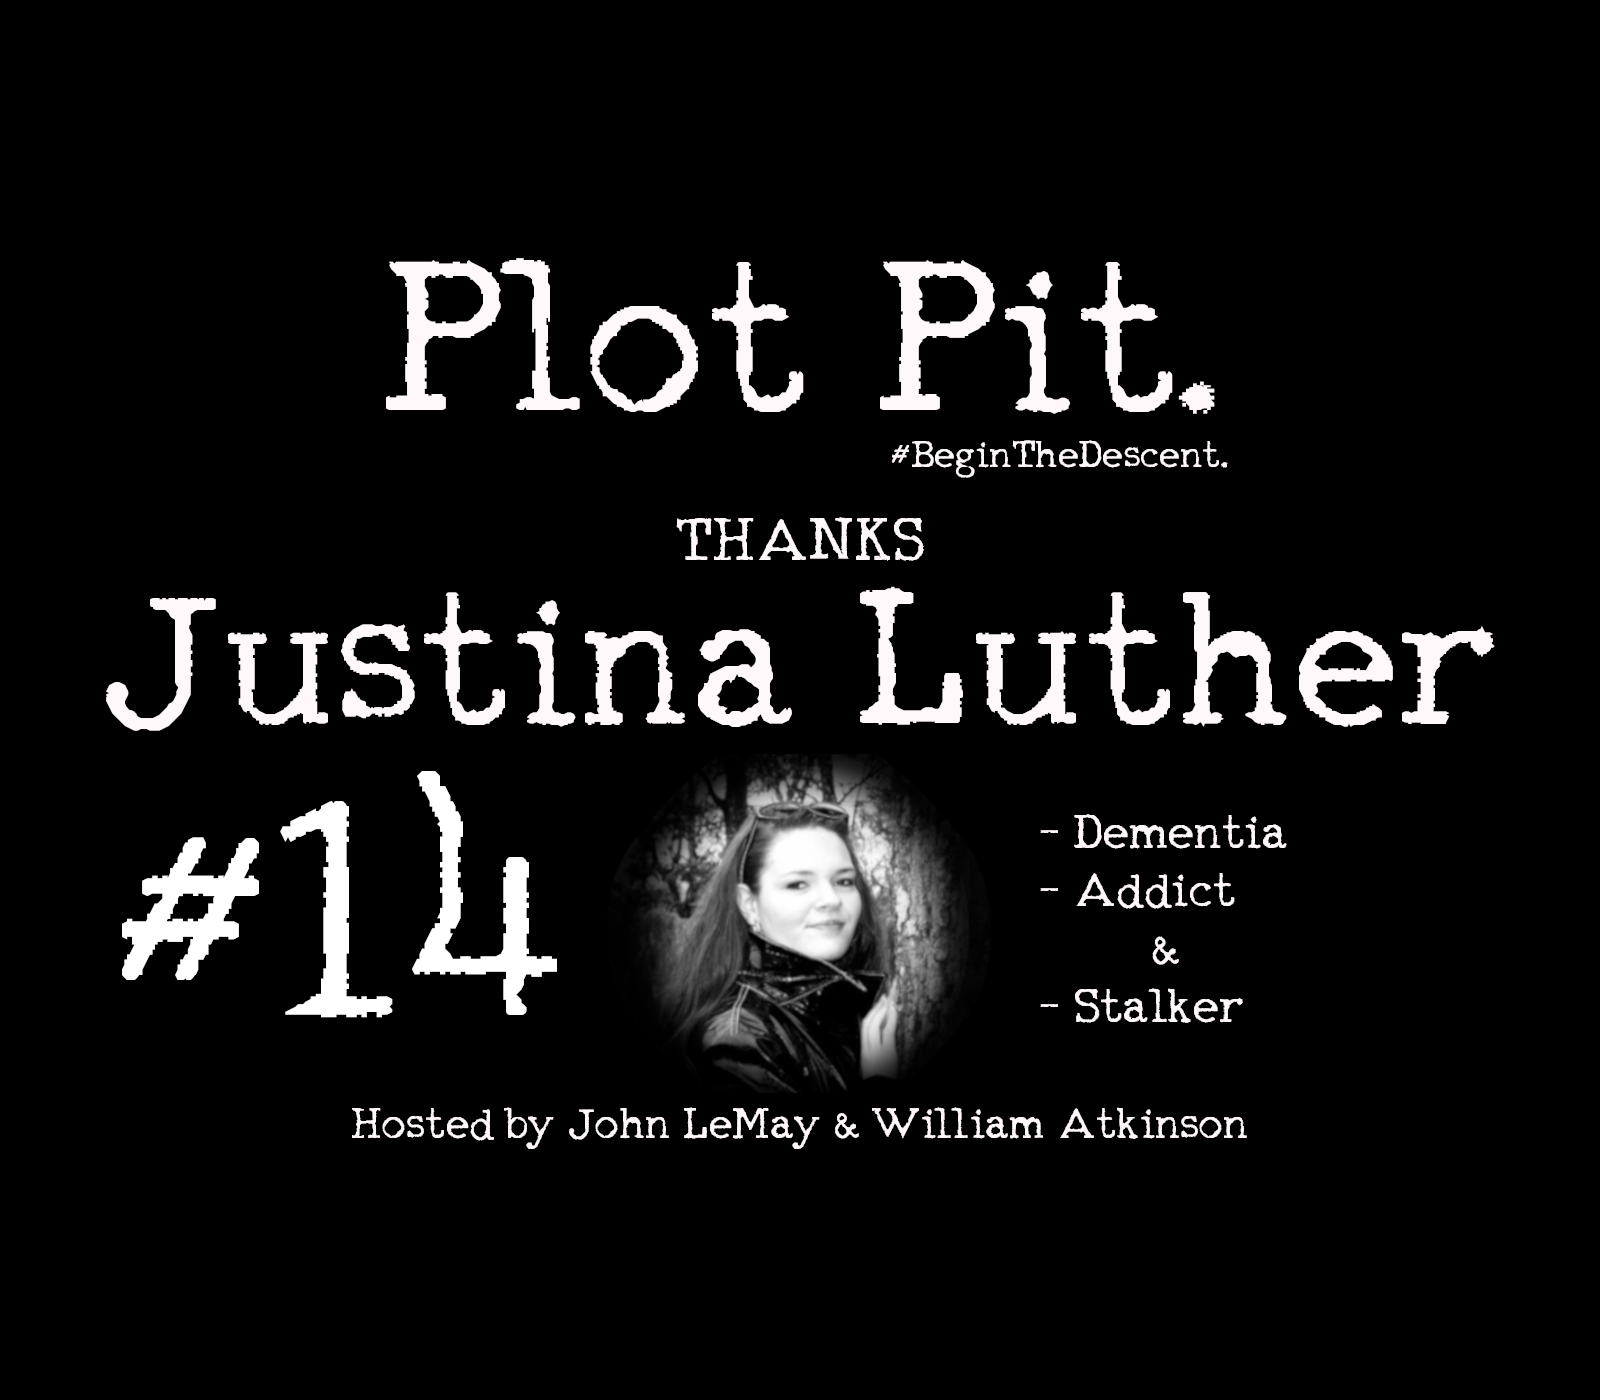 Dementia, Addict & Stalker with Justina Luther